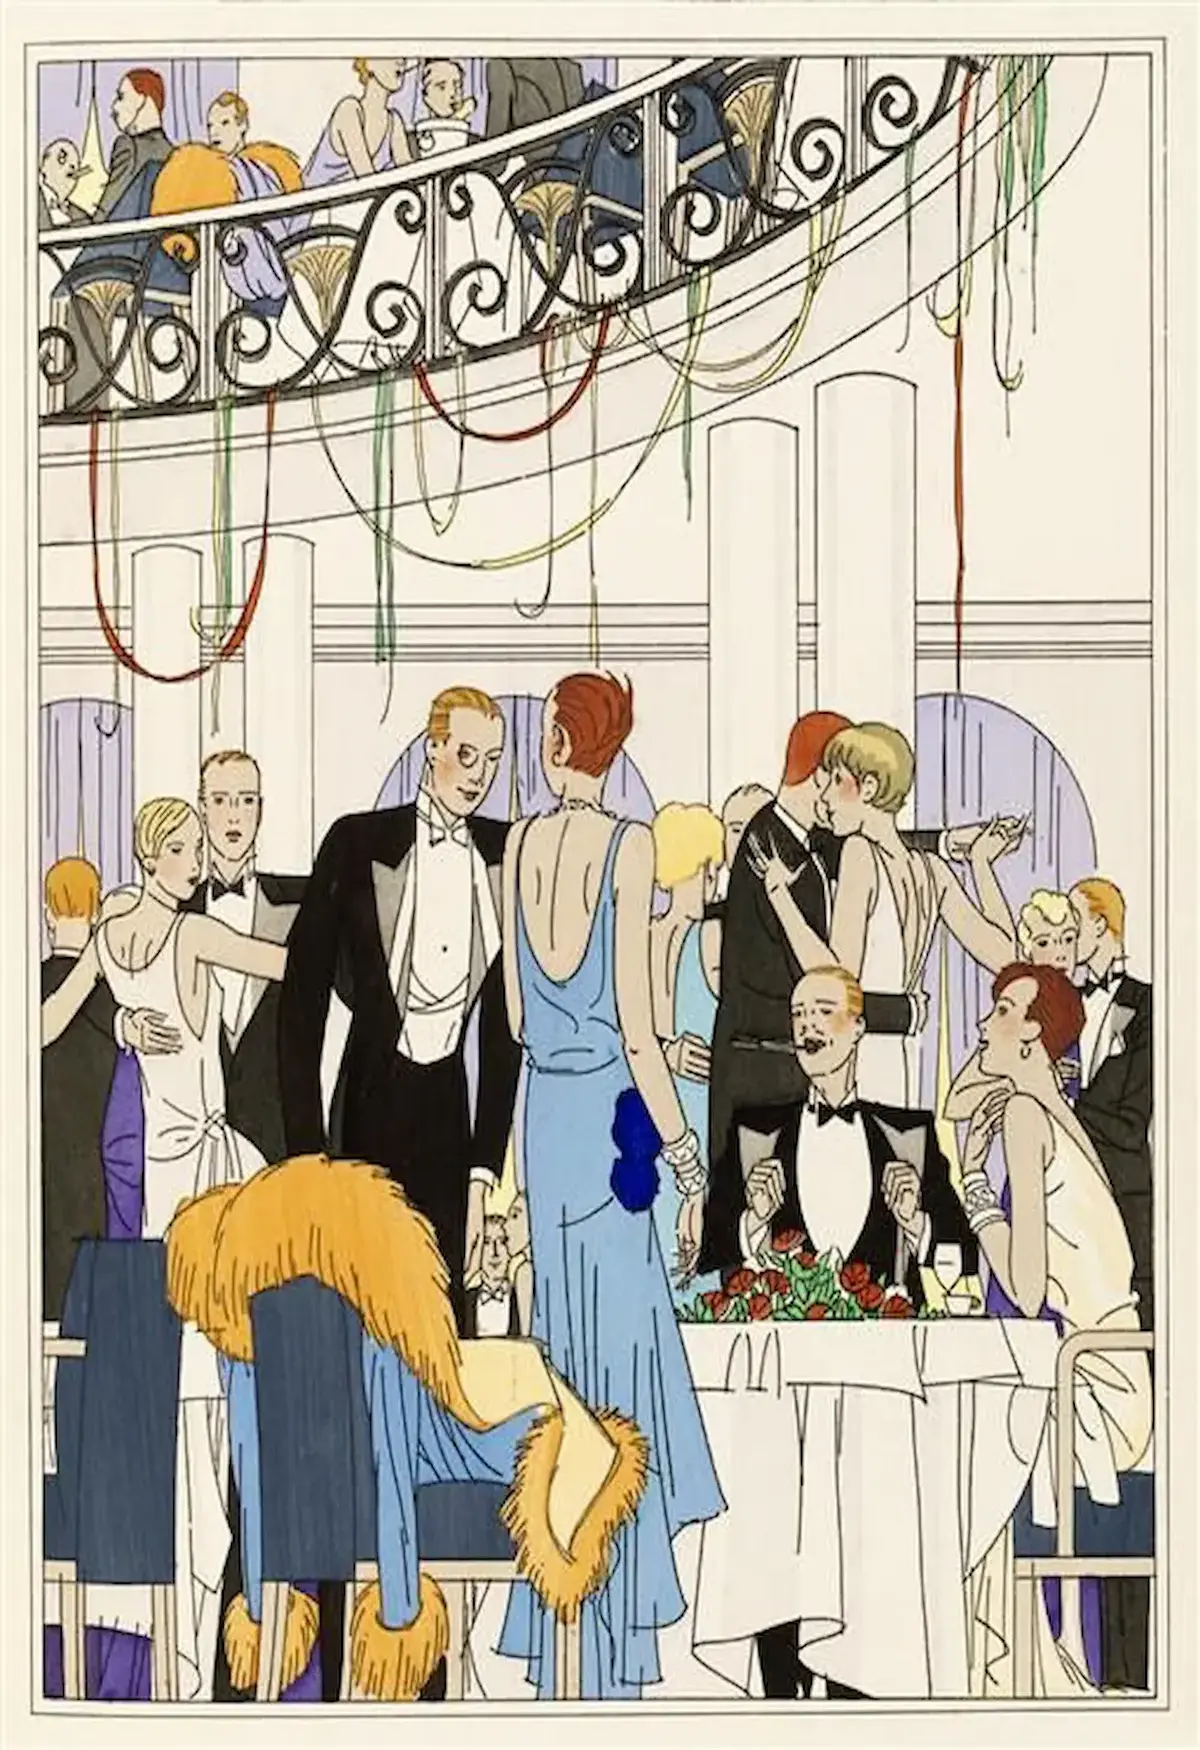 Vintage poster of guests enjoying cocktails at a party